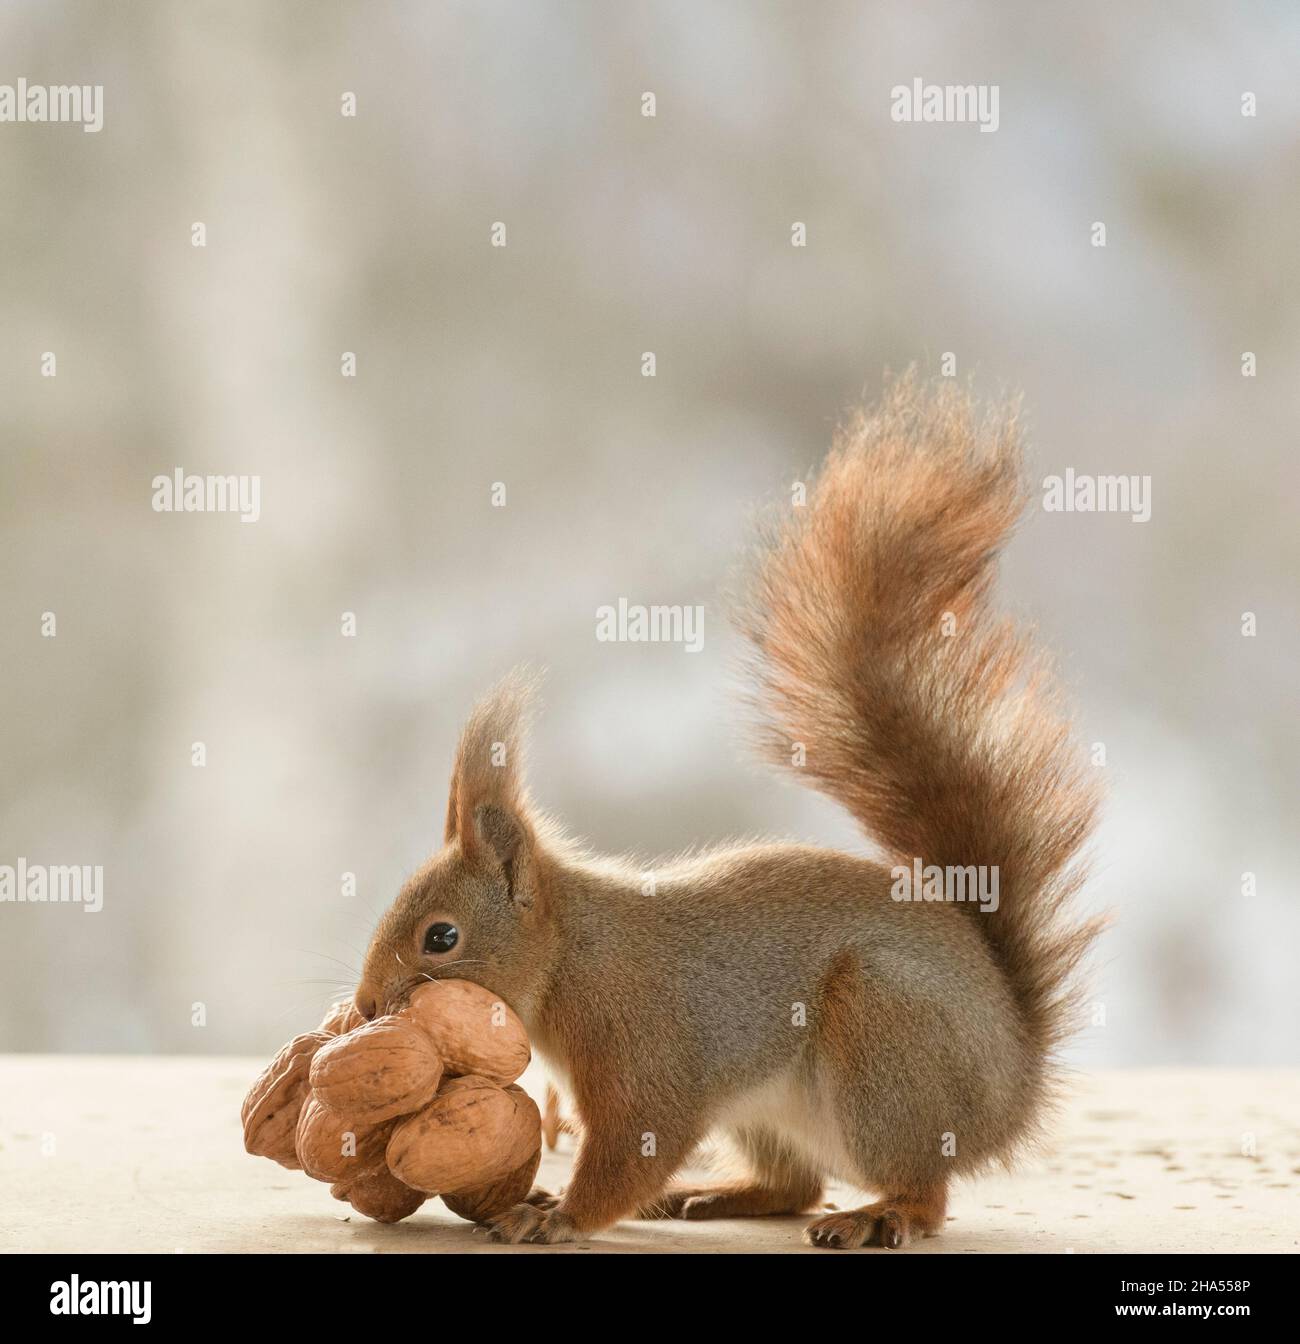 red squirrel are holding walnuts in the mouth Stock Photo